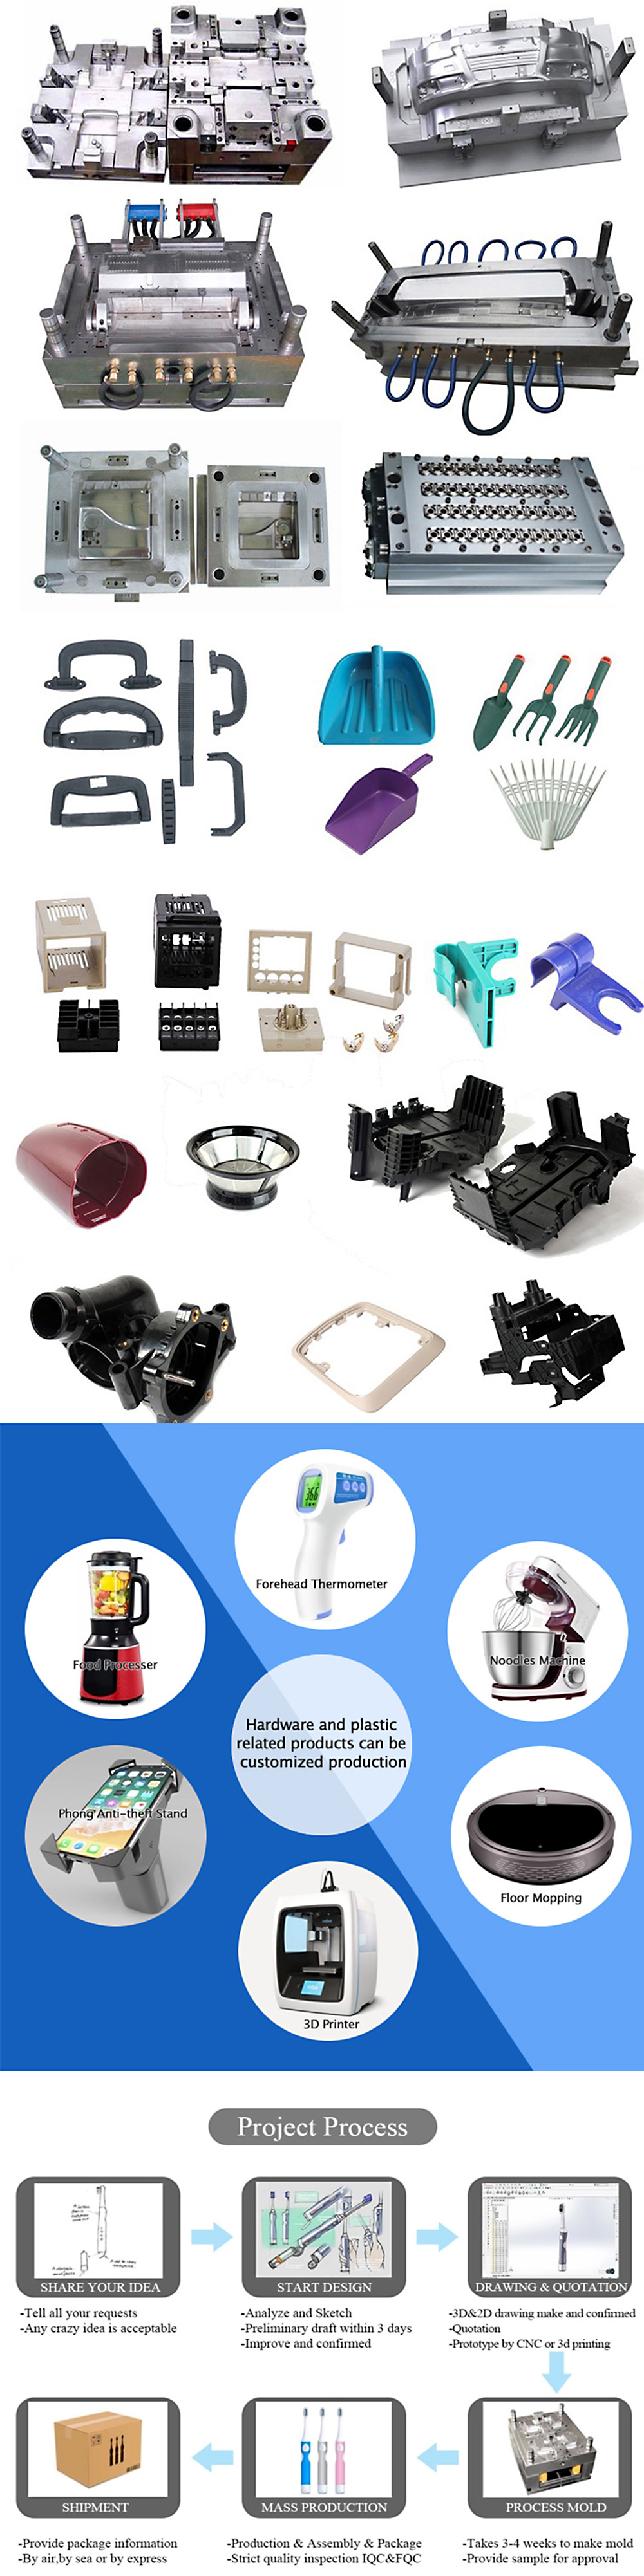 plastic injection molding service | mold maker plastic injection molding | injection molding service